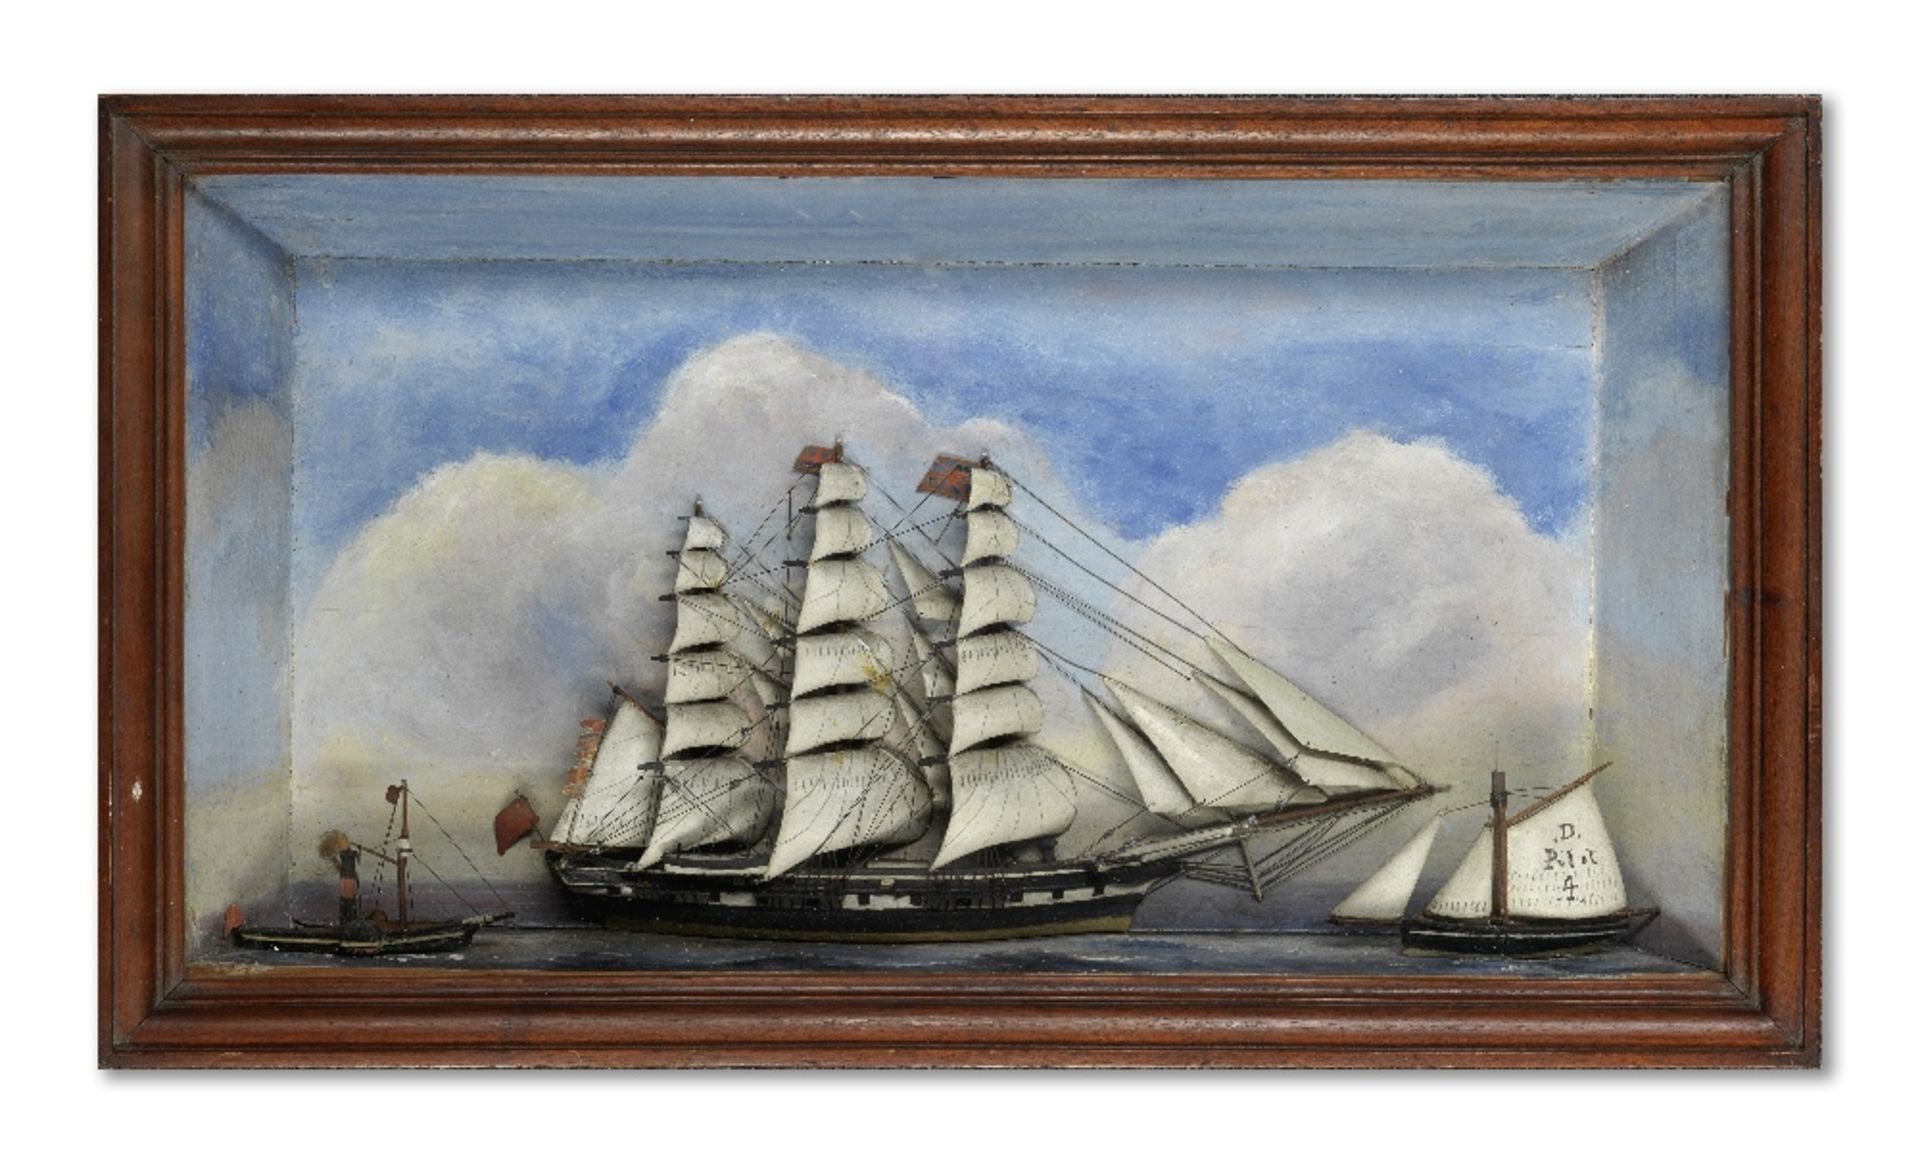 A Cased Shipping Diorama, English, Late 19th century,